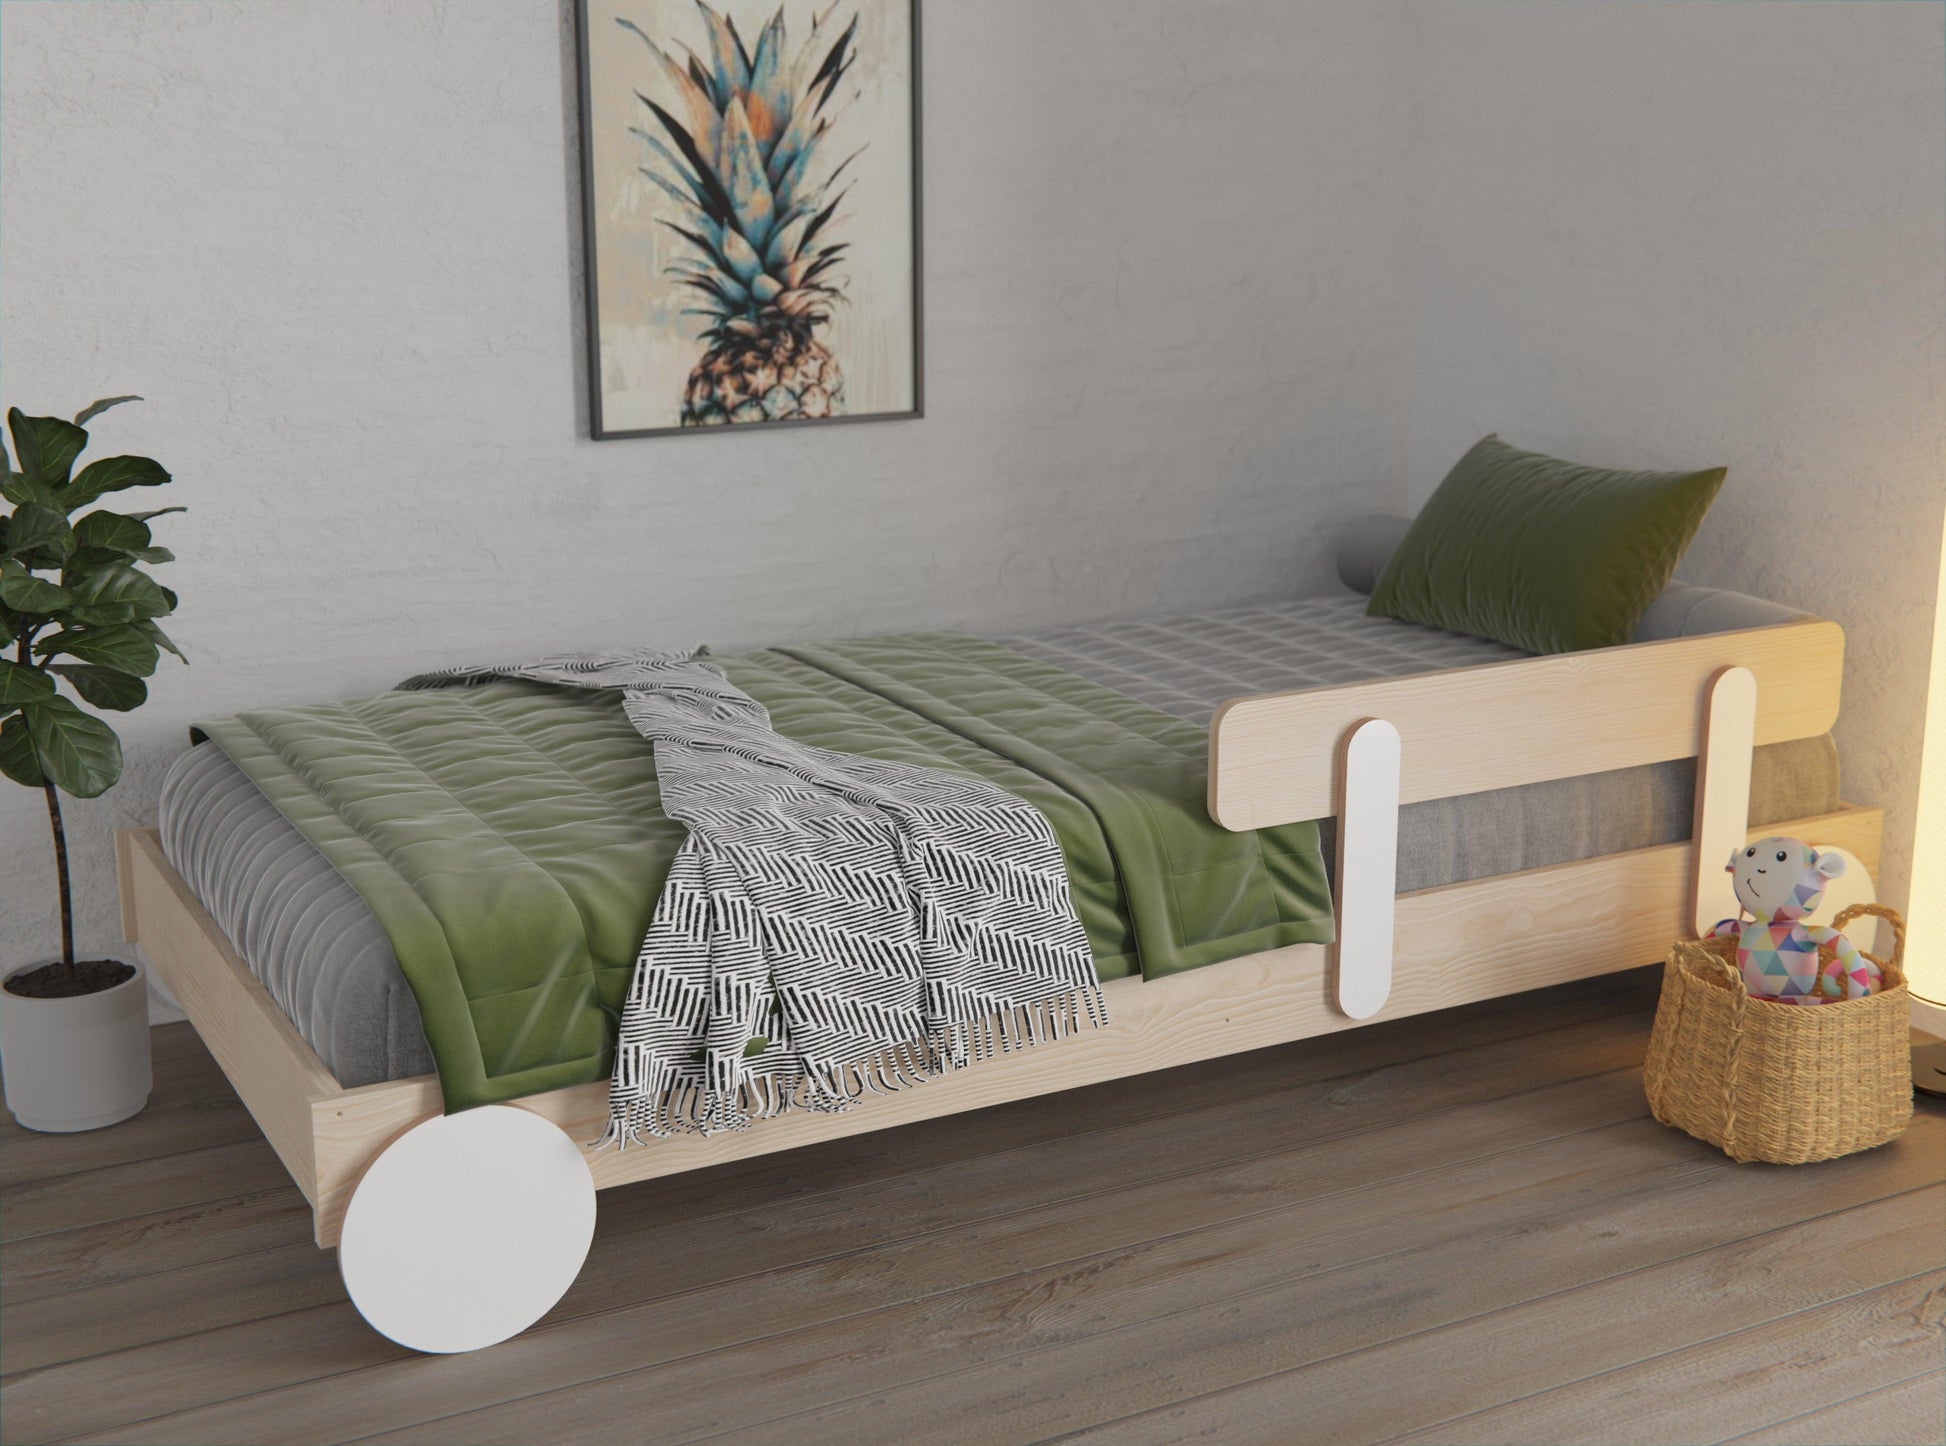 Explore our Montessori floor bed frames made from wood, ideal for toddlers. Create a safe and cozy sleep space with our kids' bed frame collection.